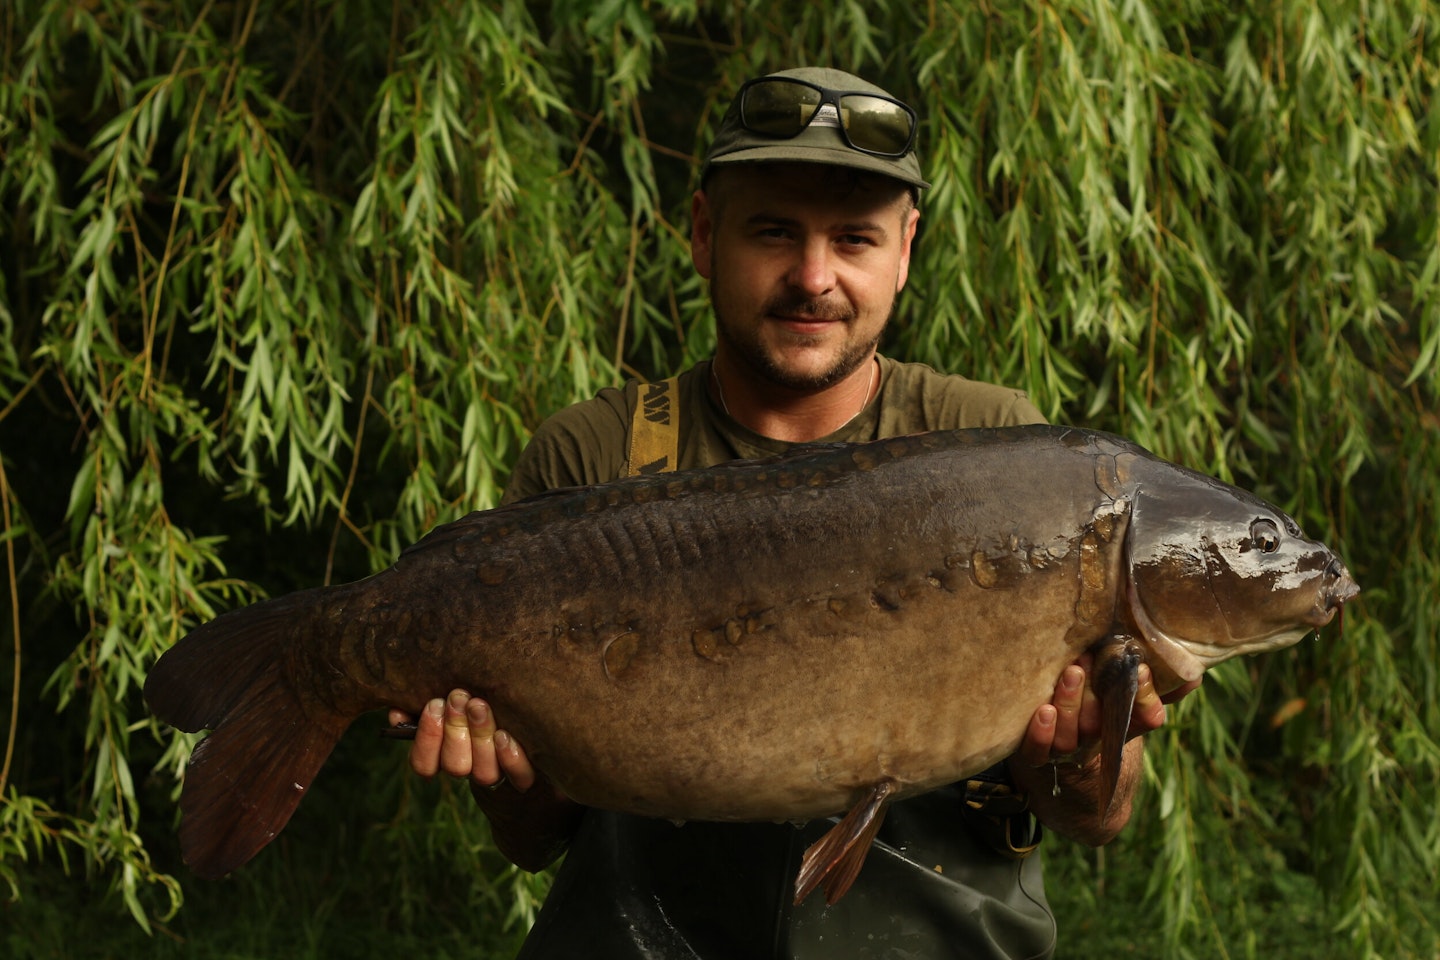 How to prepare particles — Angling Times